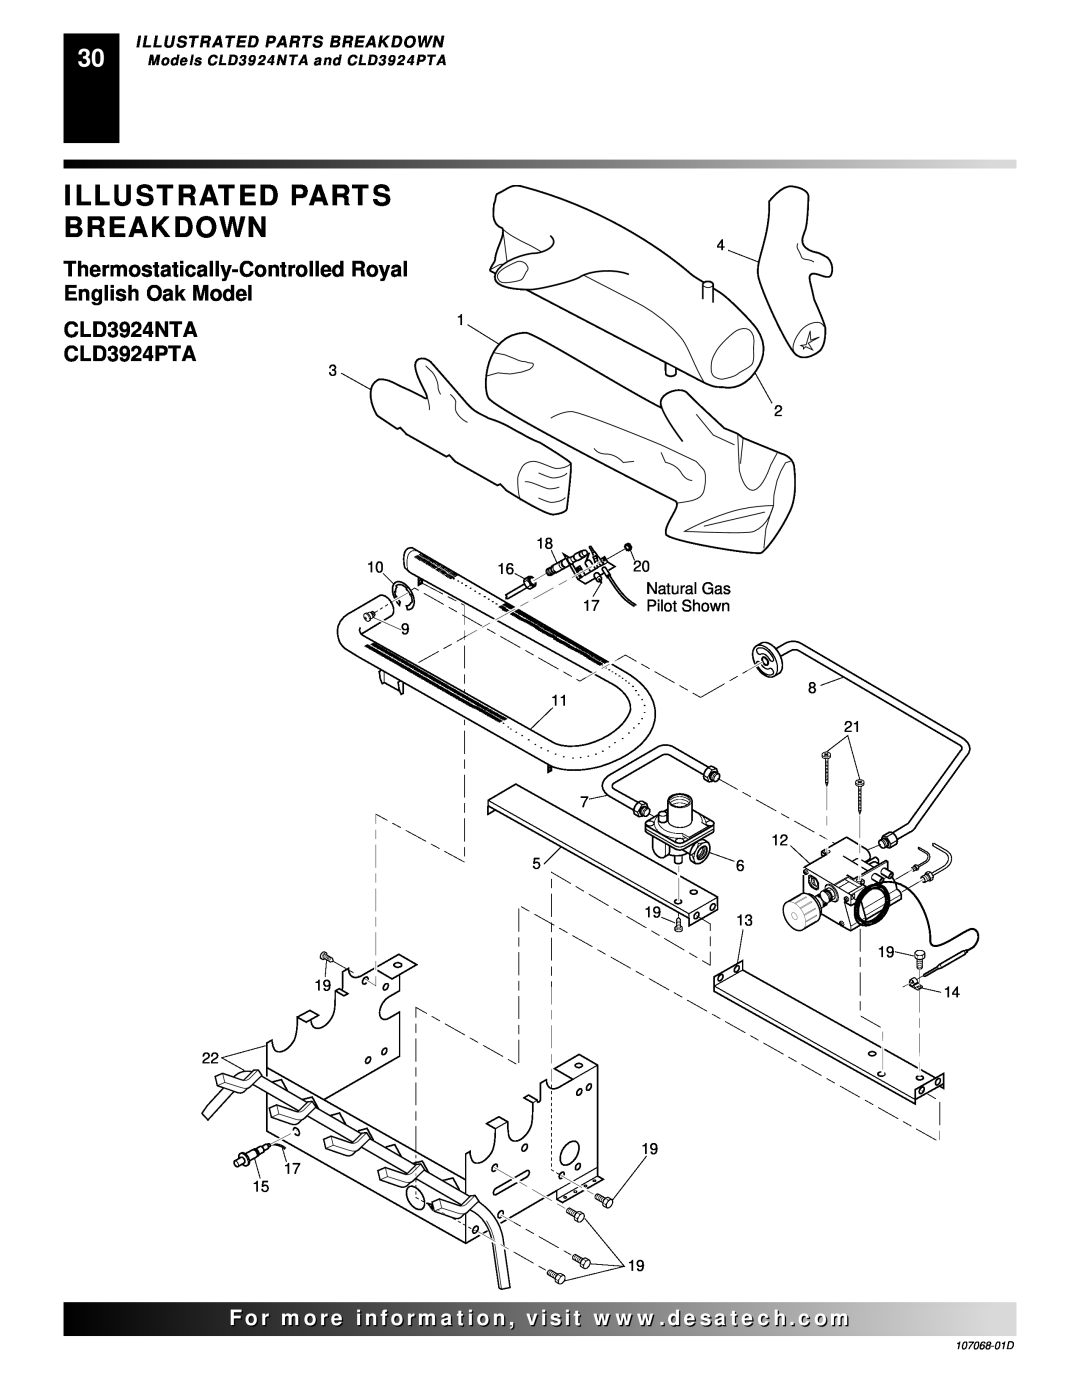 Desa CGS3124P installation manual CLD3924NTA CLD3924PTA, Illustrated Parts Breakdown, Models CLD3924NTA and CLD3924PTA 